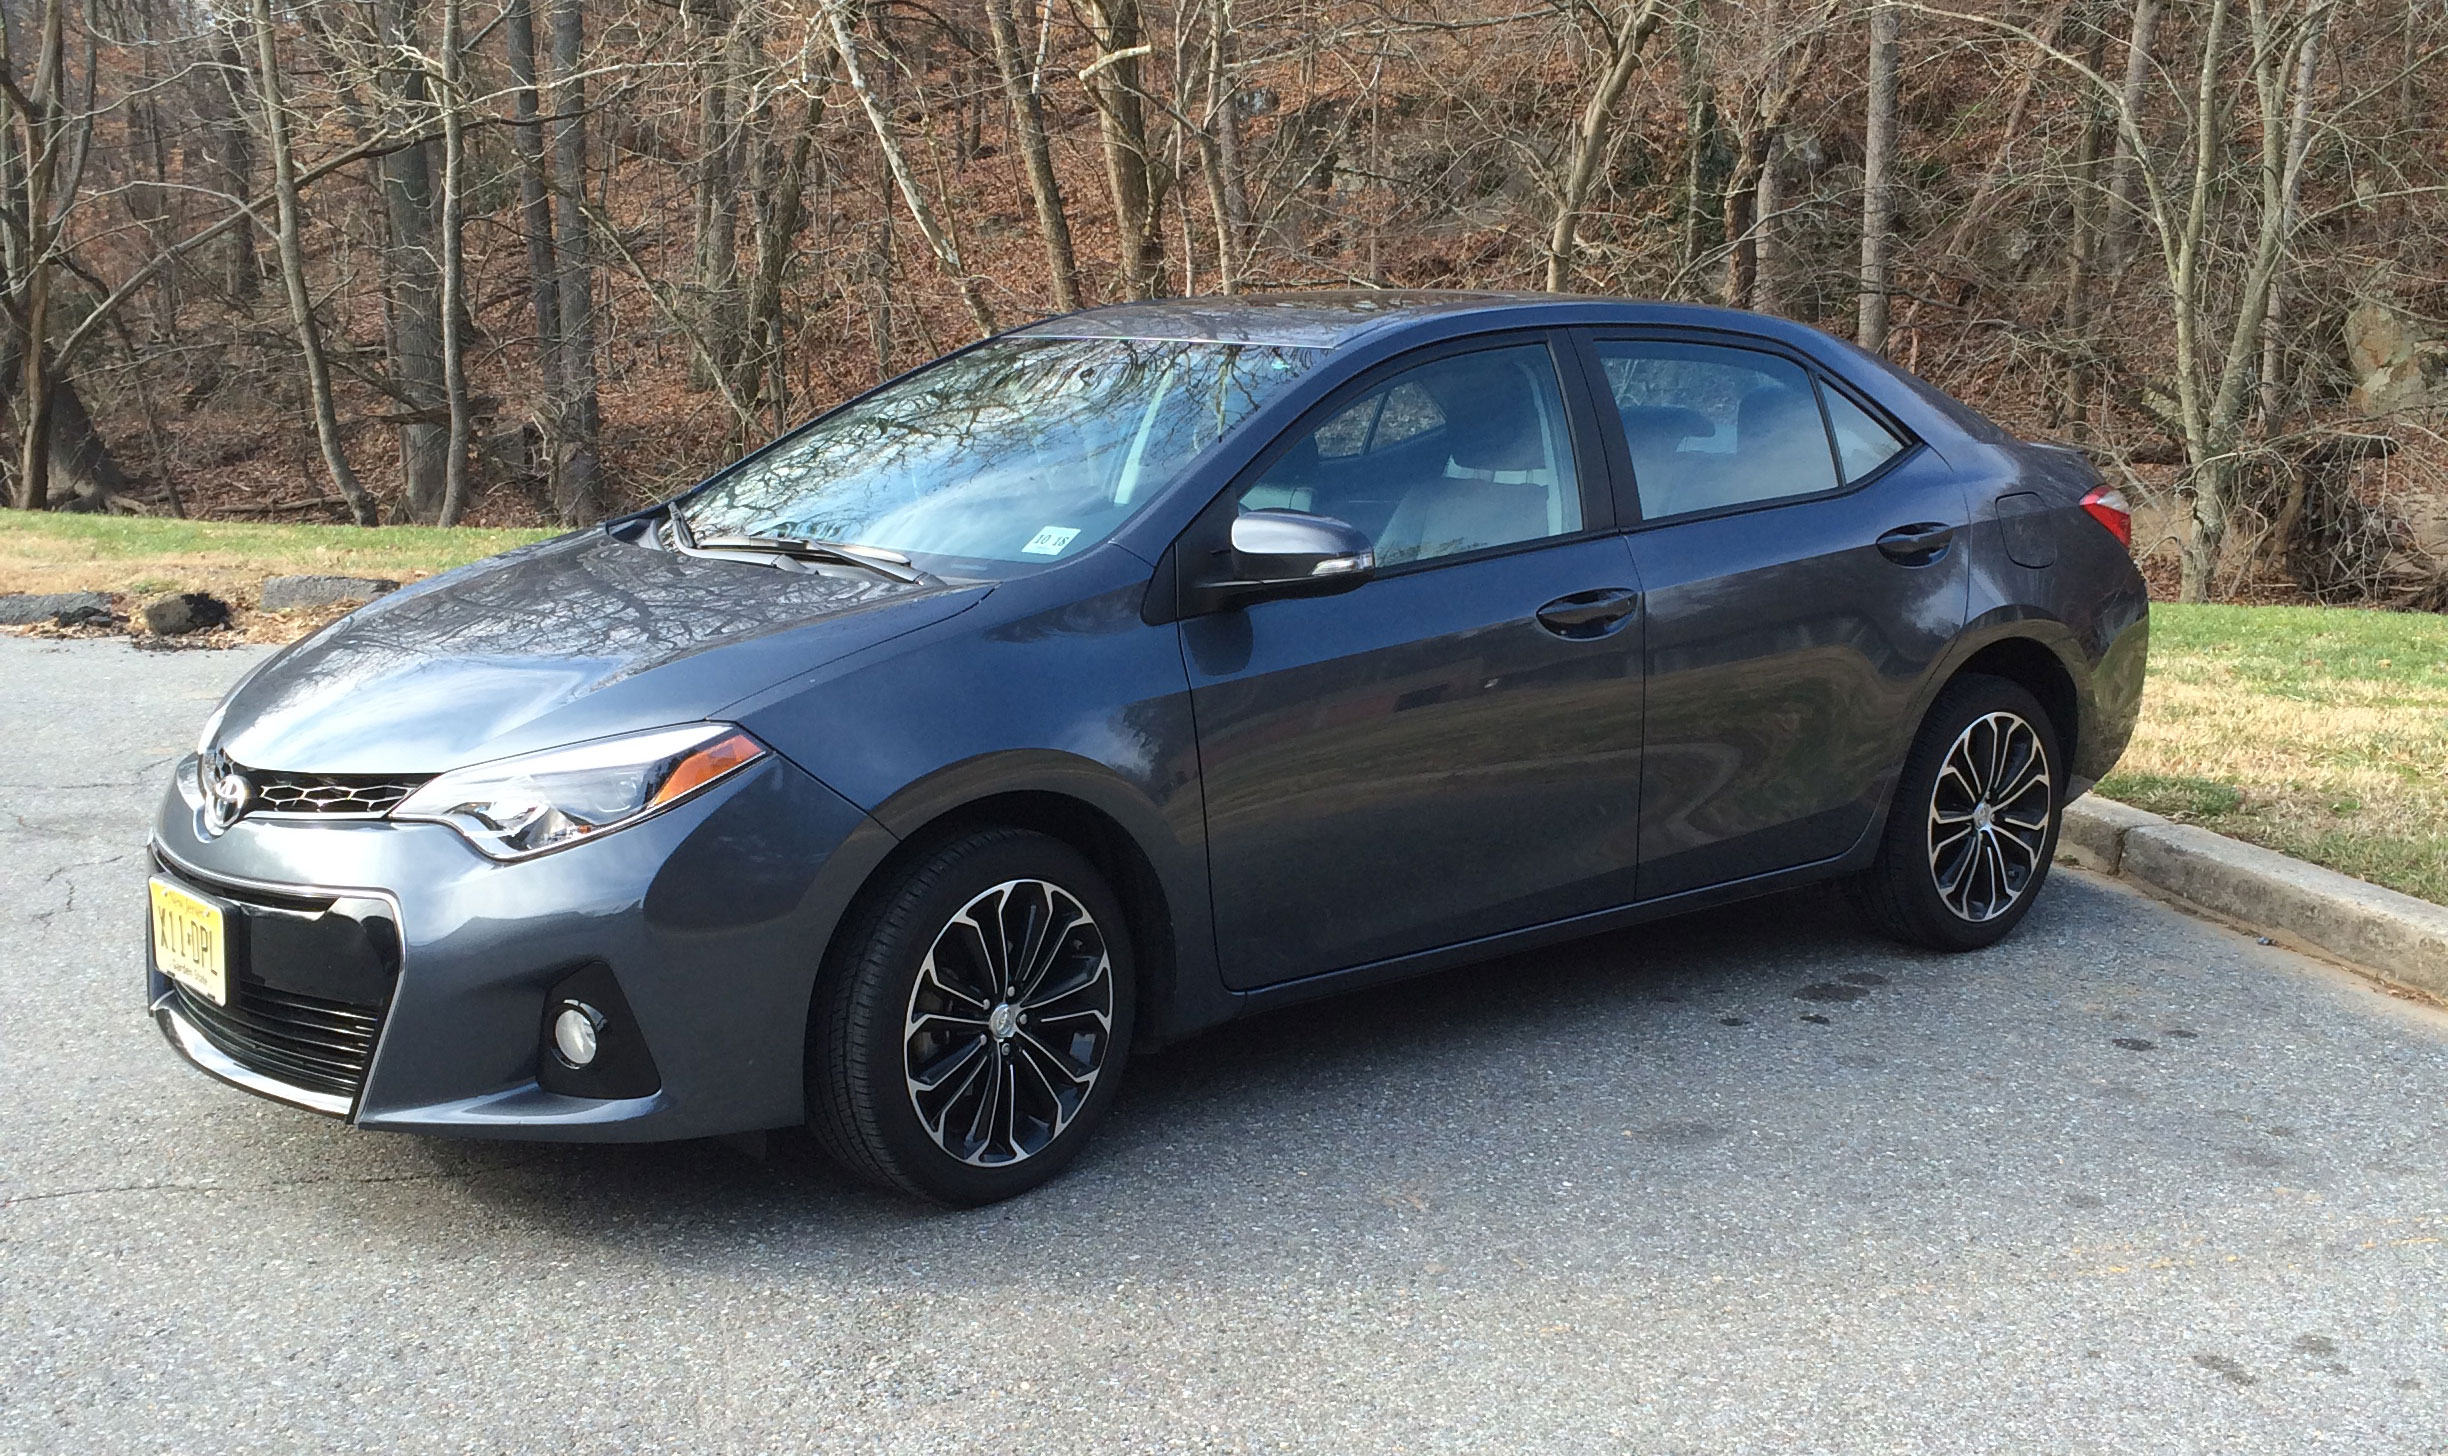 Car Report: Toyota Corolla redesigned to keep its status in the compact sedan market